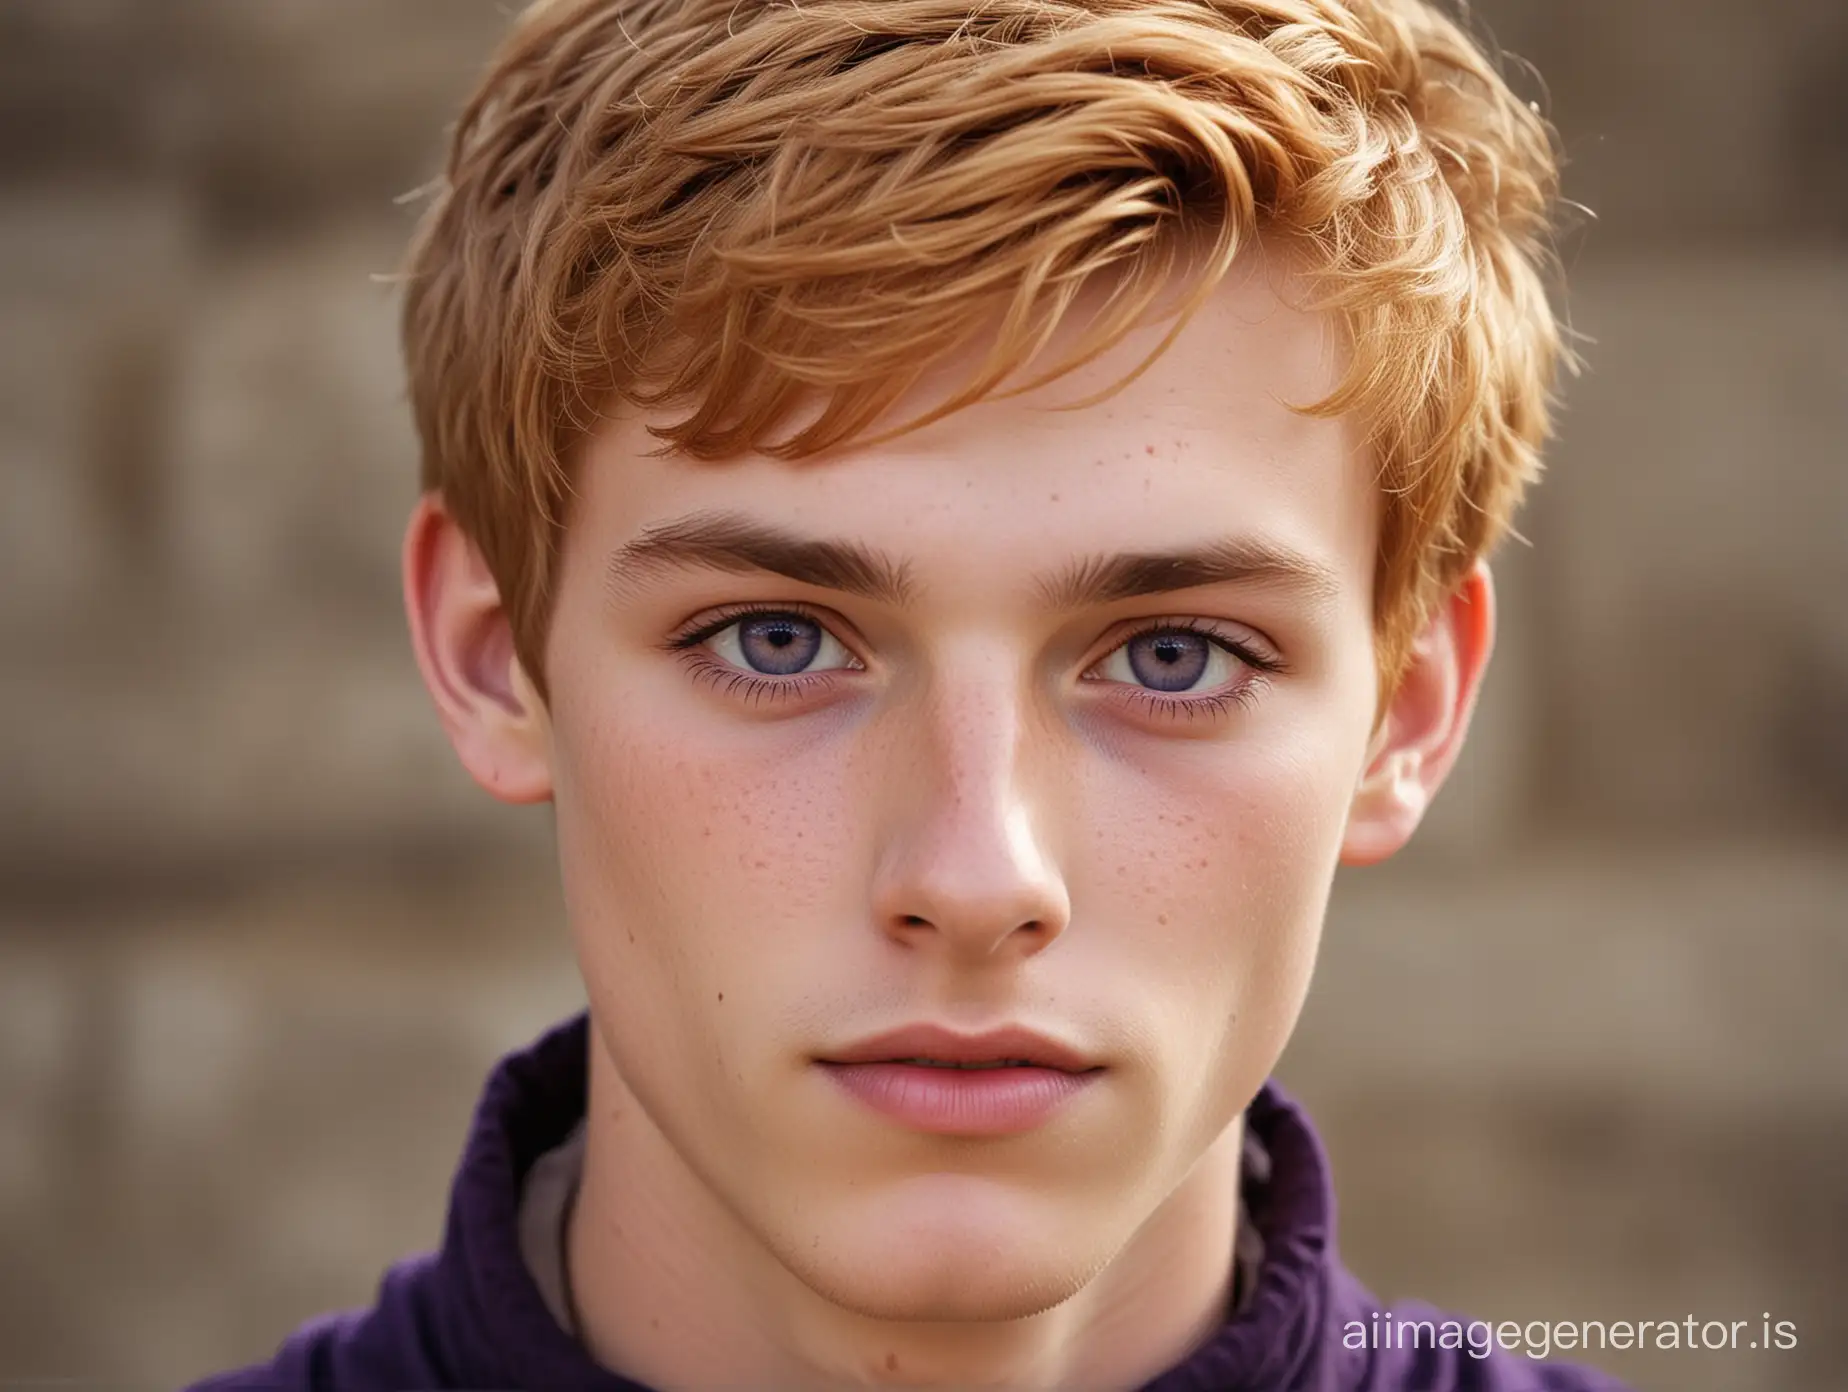 Medieval-Teen-with-Strawberry-Blond-Hair-and-Purple-Eyes-in-Royal-Setting